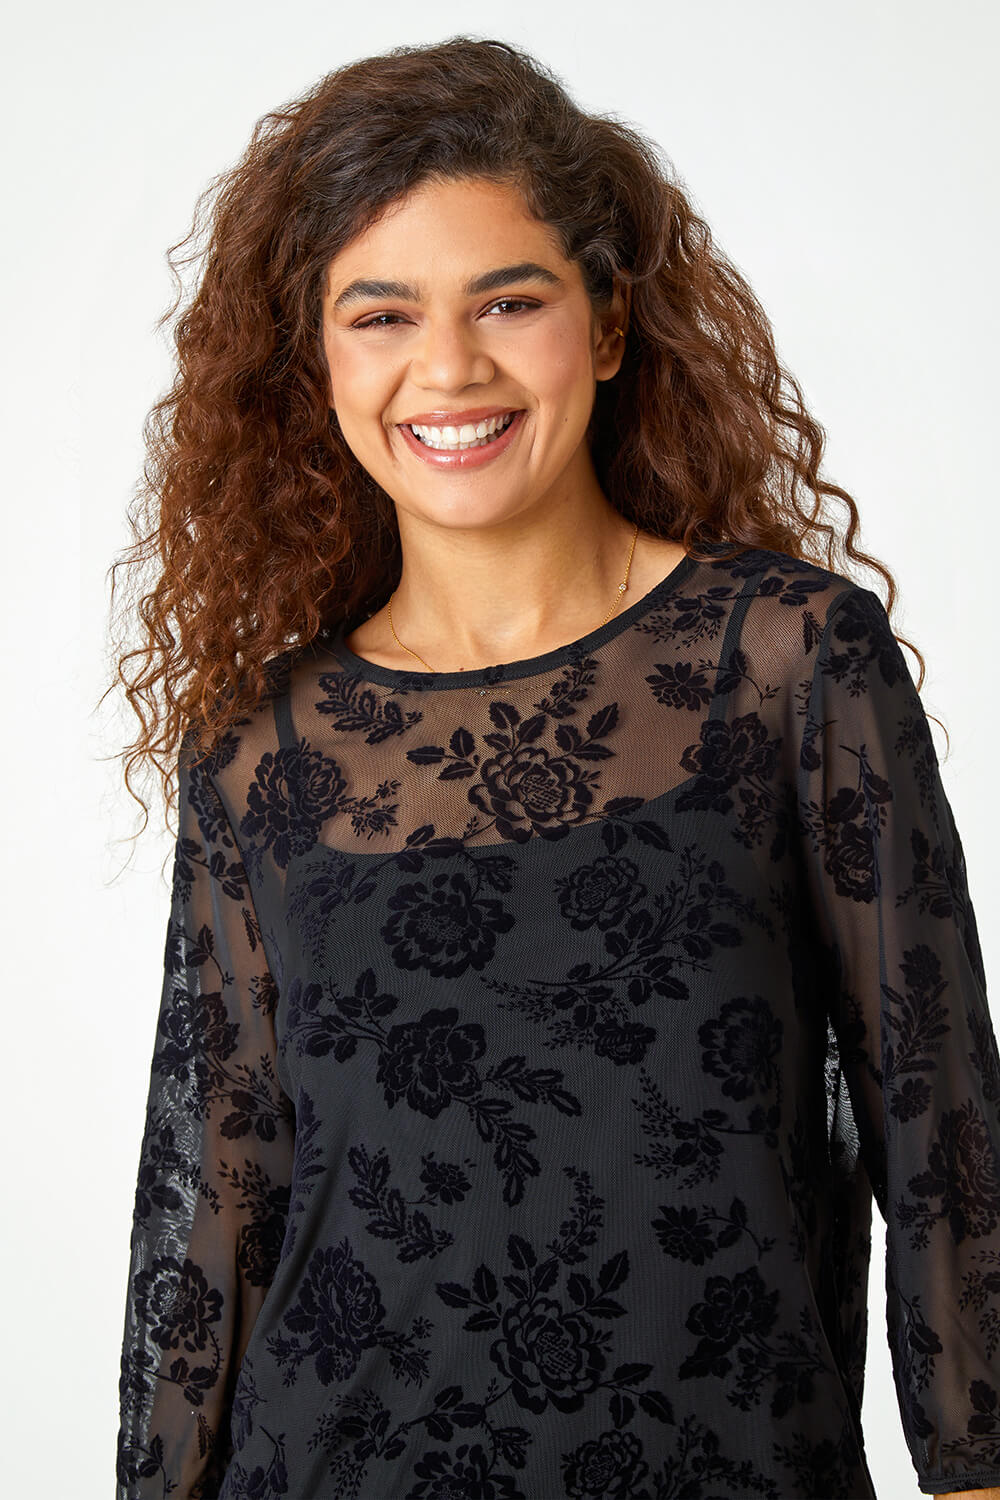 Black Textured Floral Print Mesh Stretch Top, Image 4 of 5